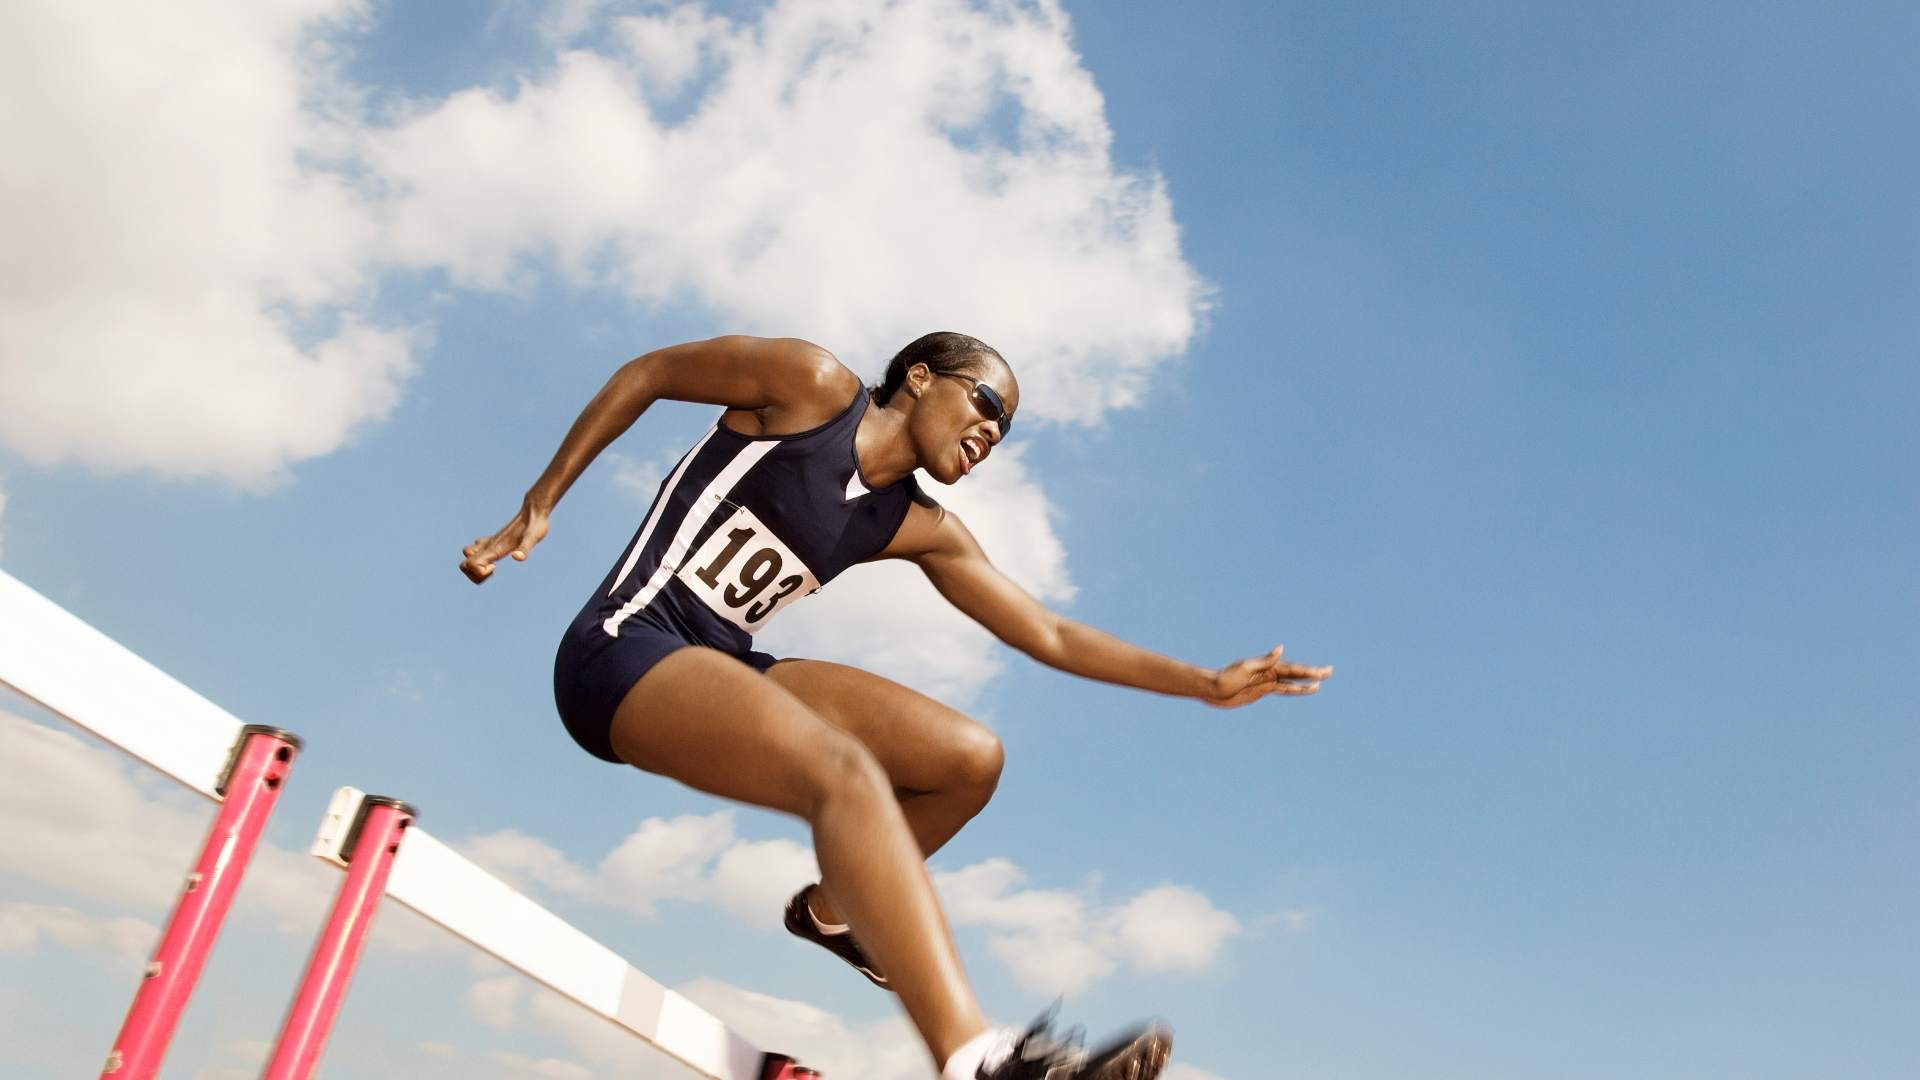 A Black person of color jumps over hurdles during athletics. The camera is at a low-angle shot.